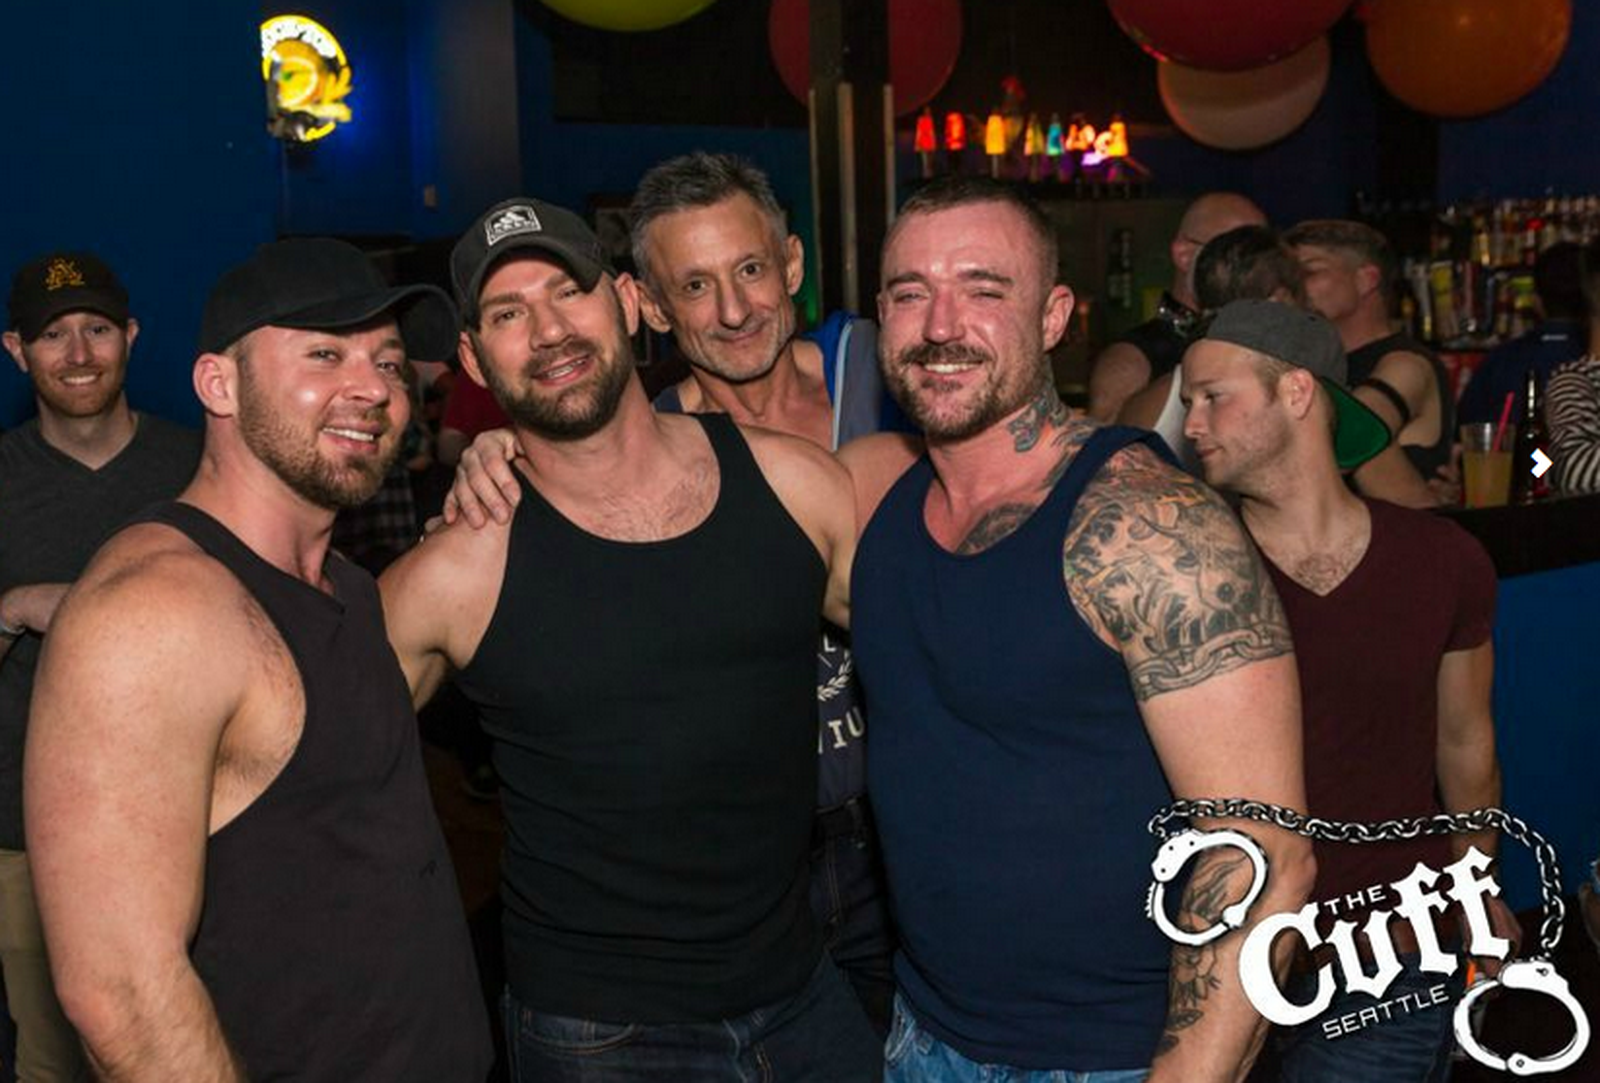 gay bars seattle areas